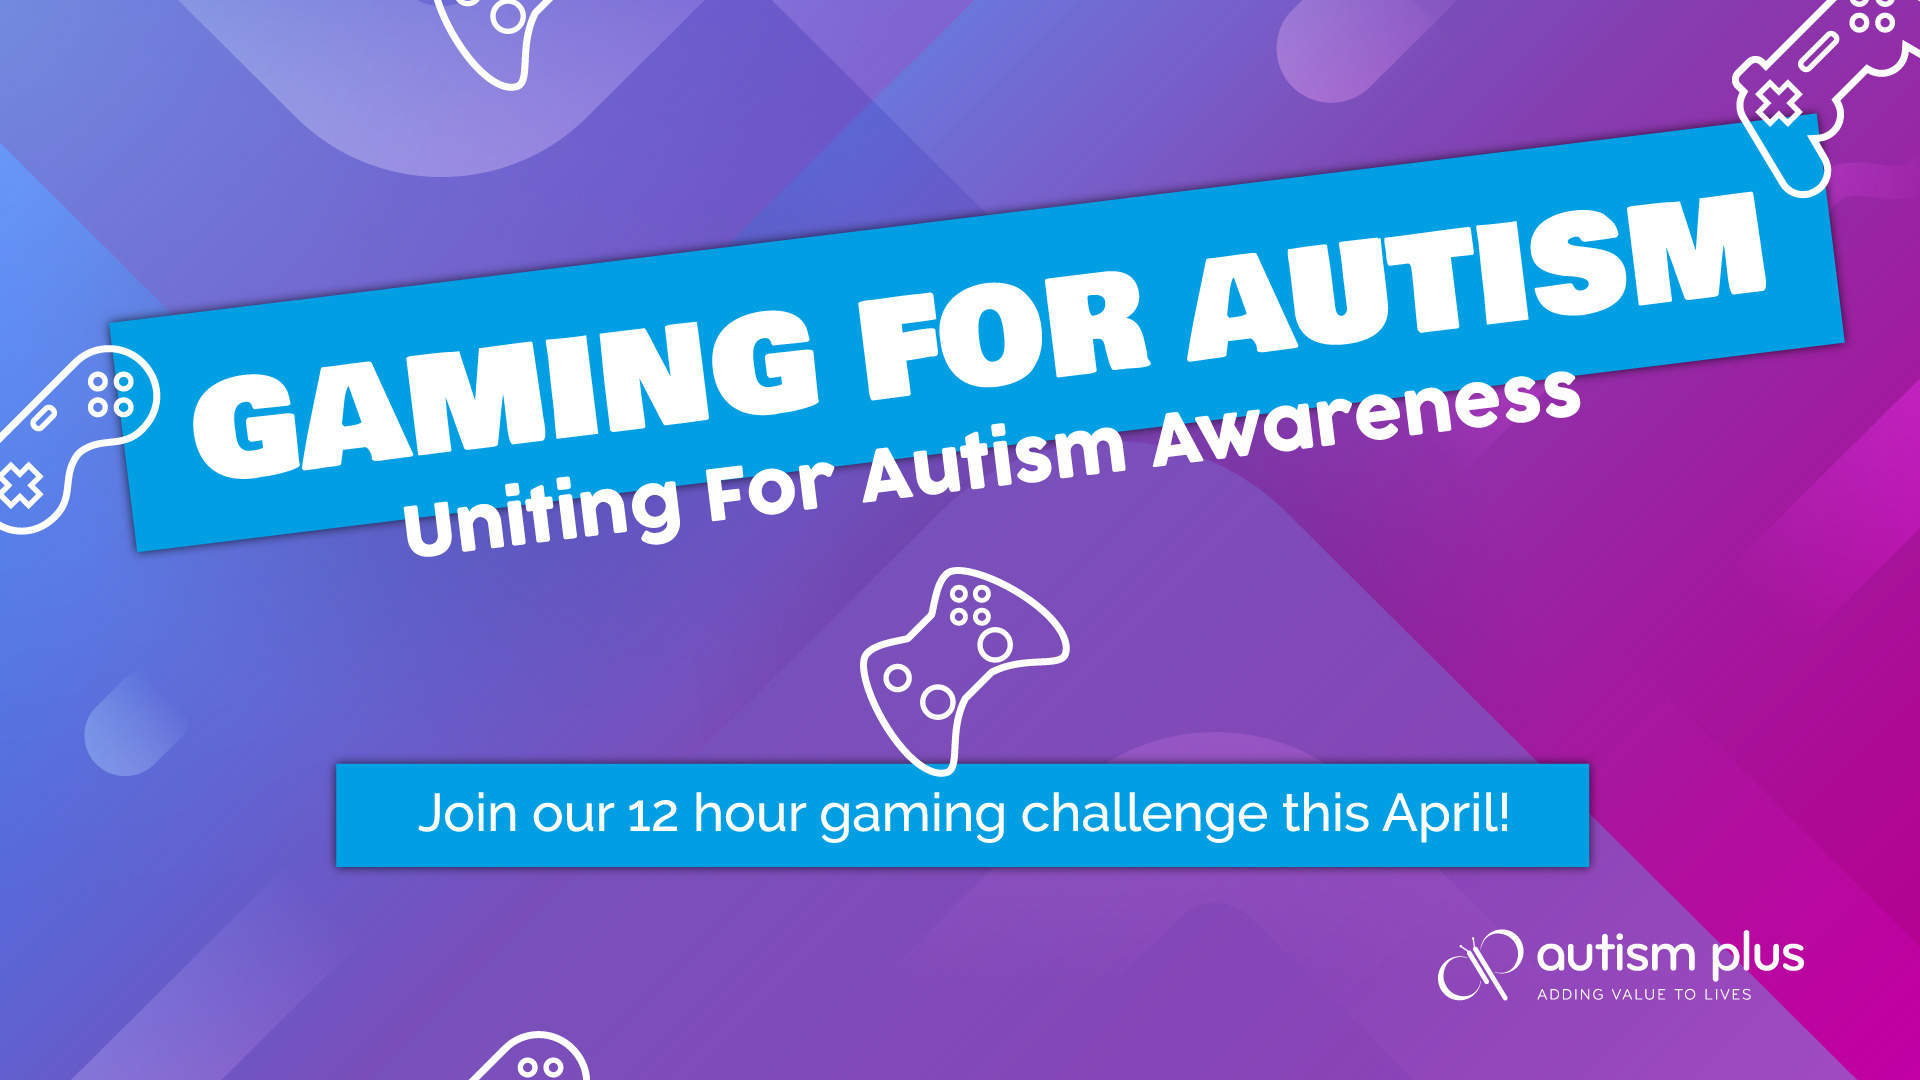 Gaming for autism